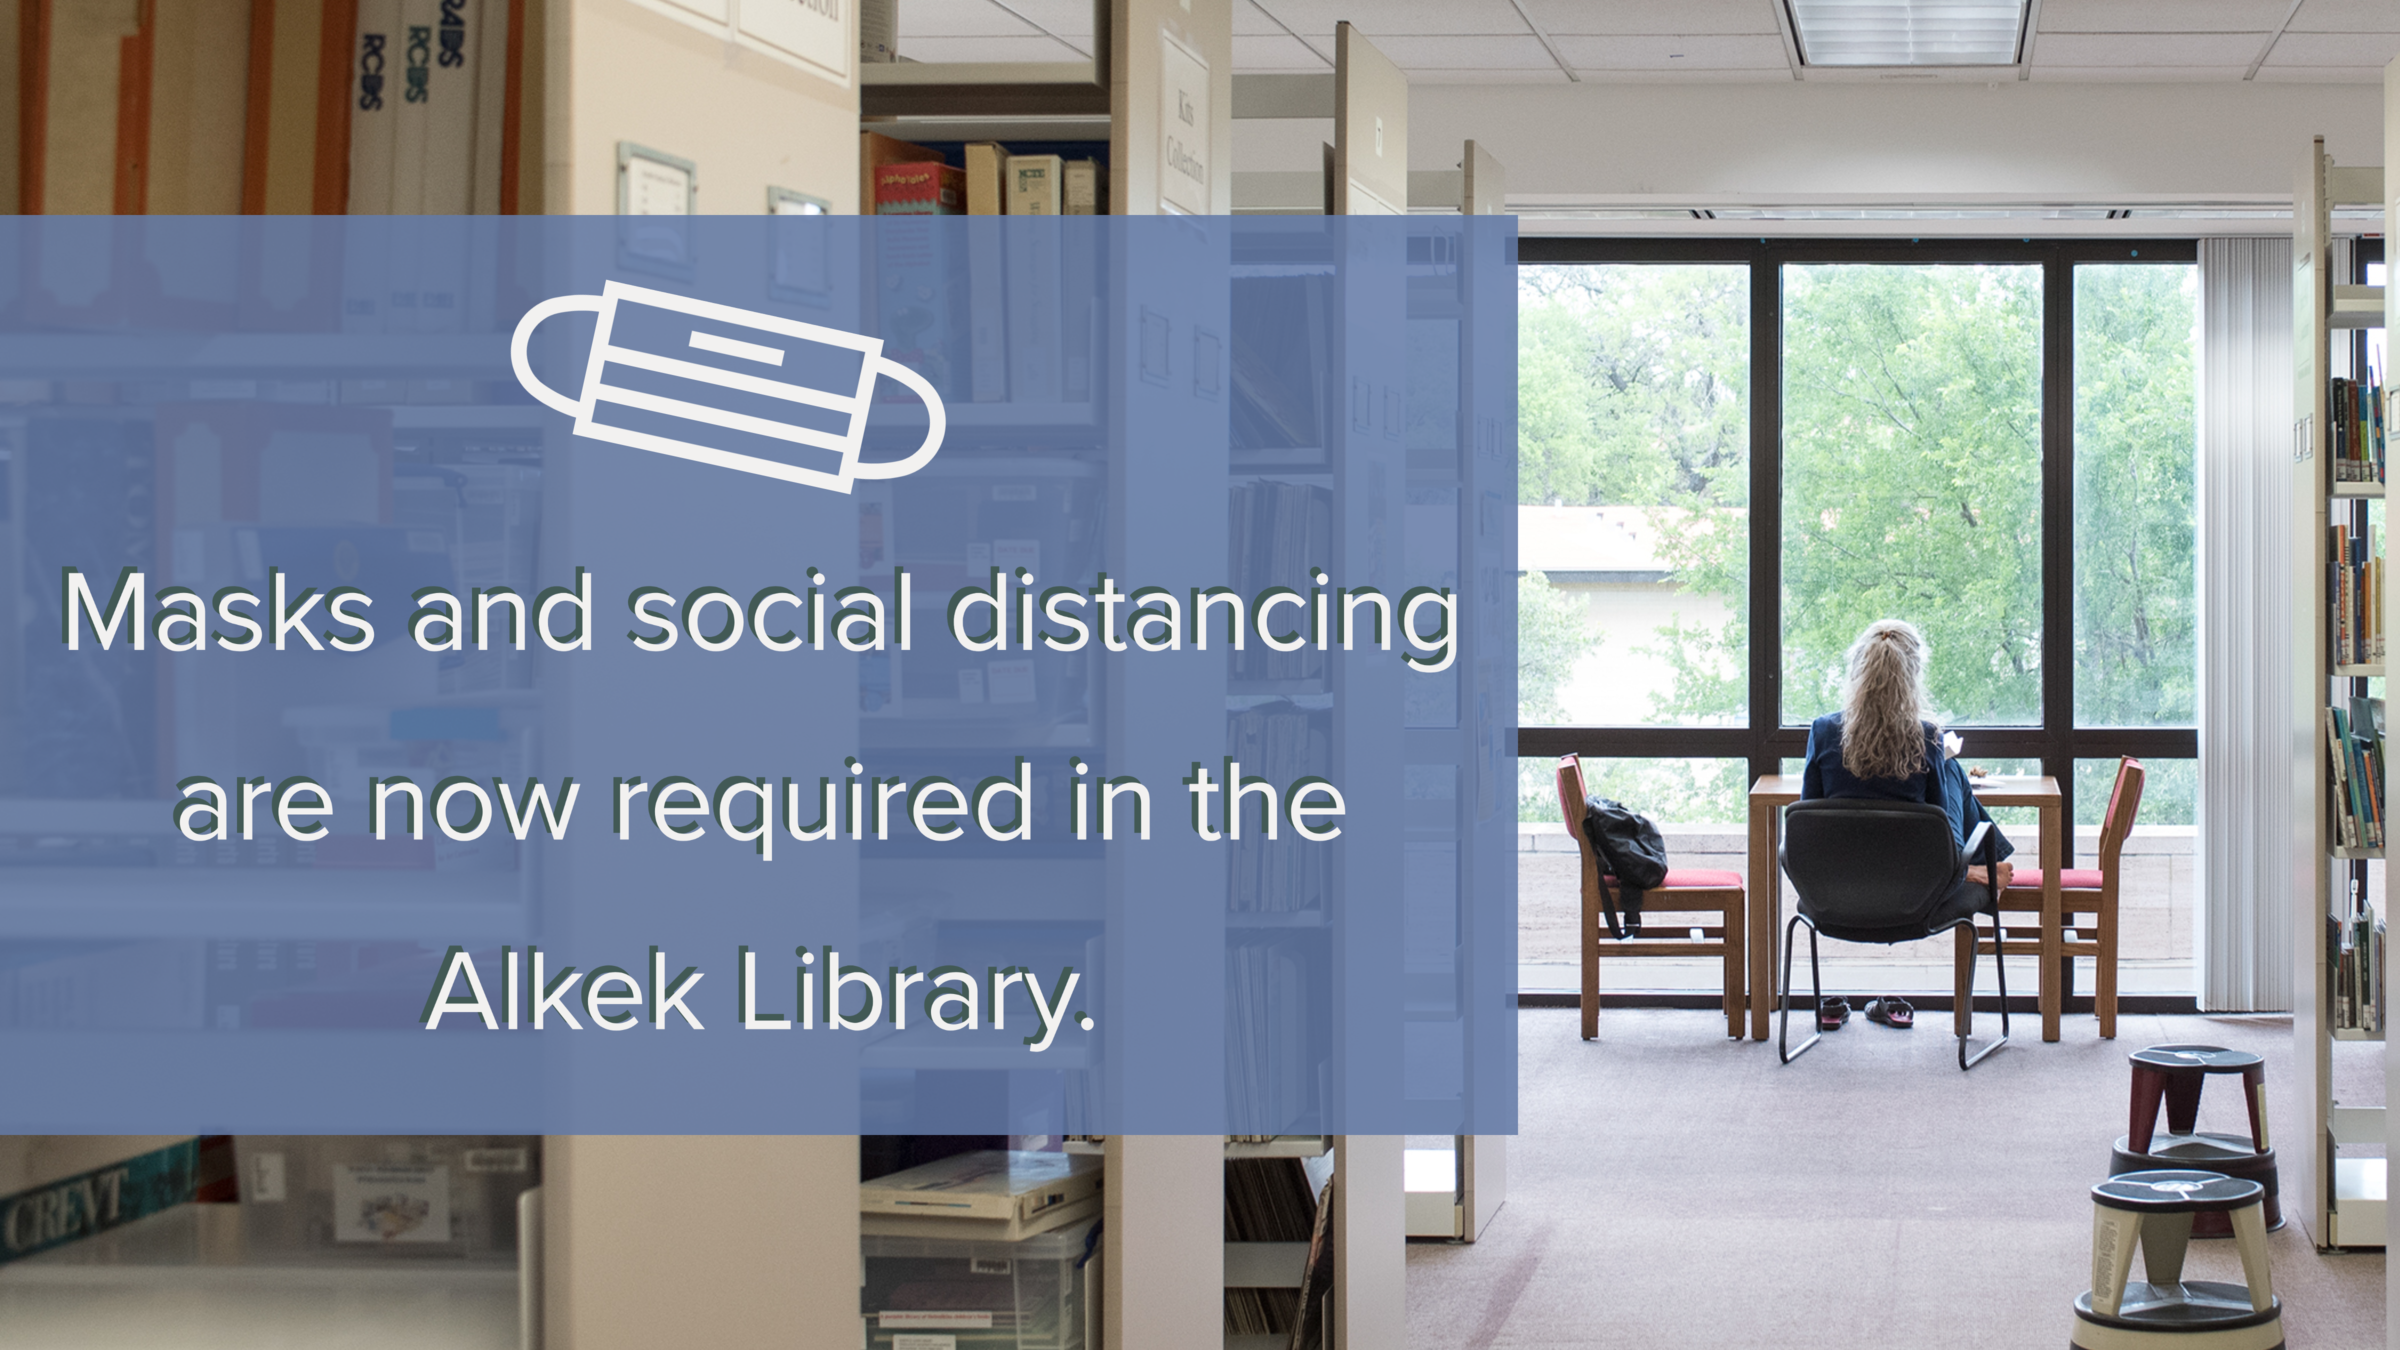 Masks and social distancing are now required in the Alkek Library